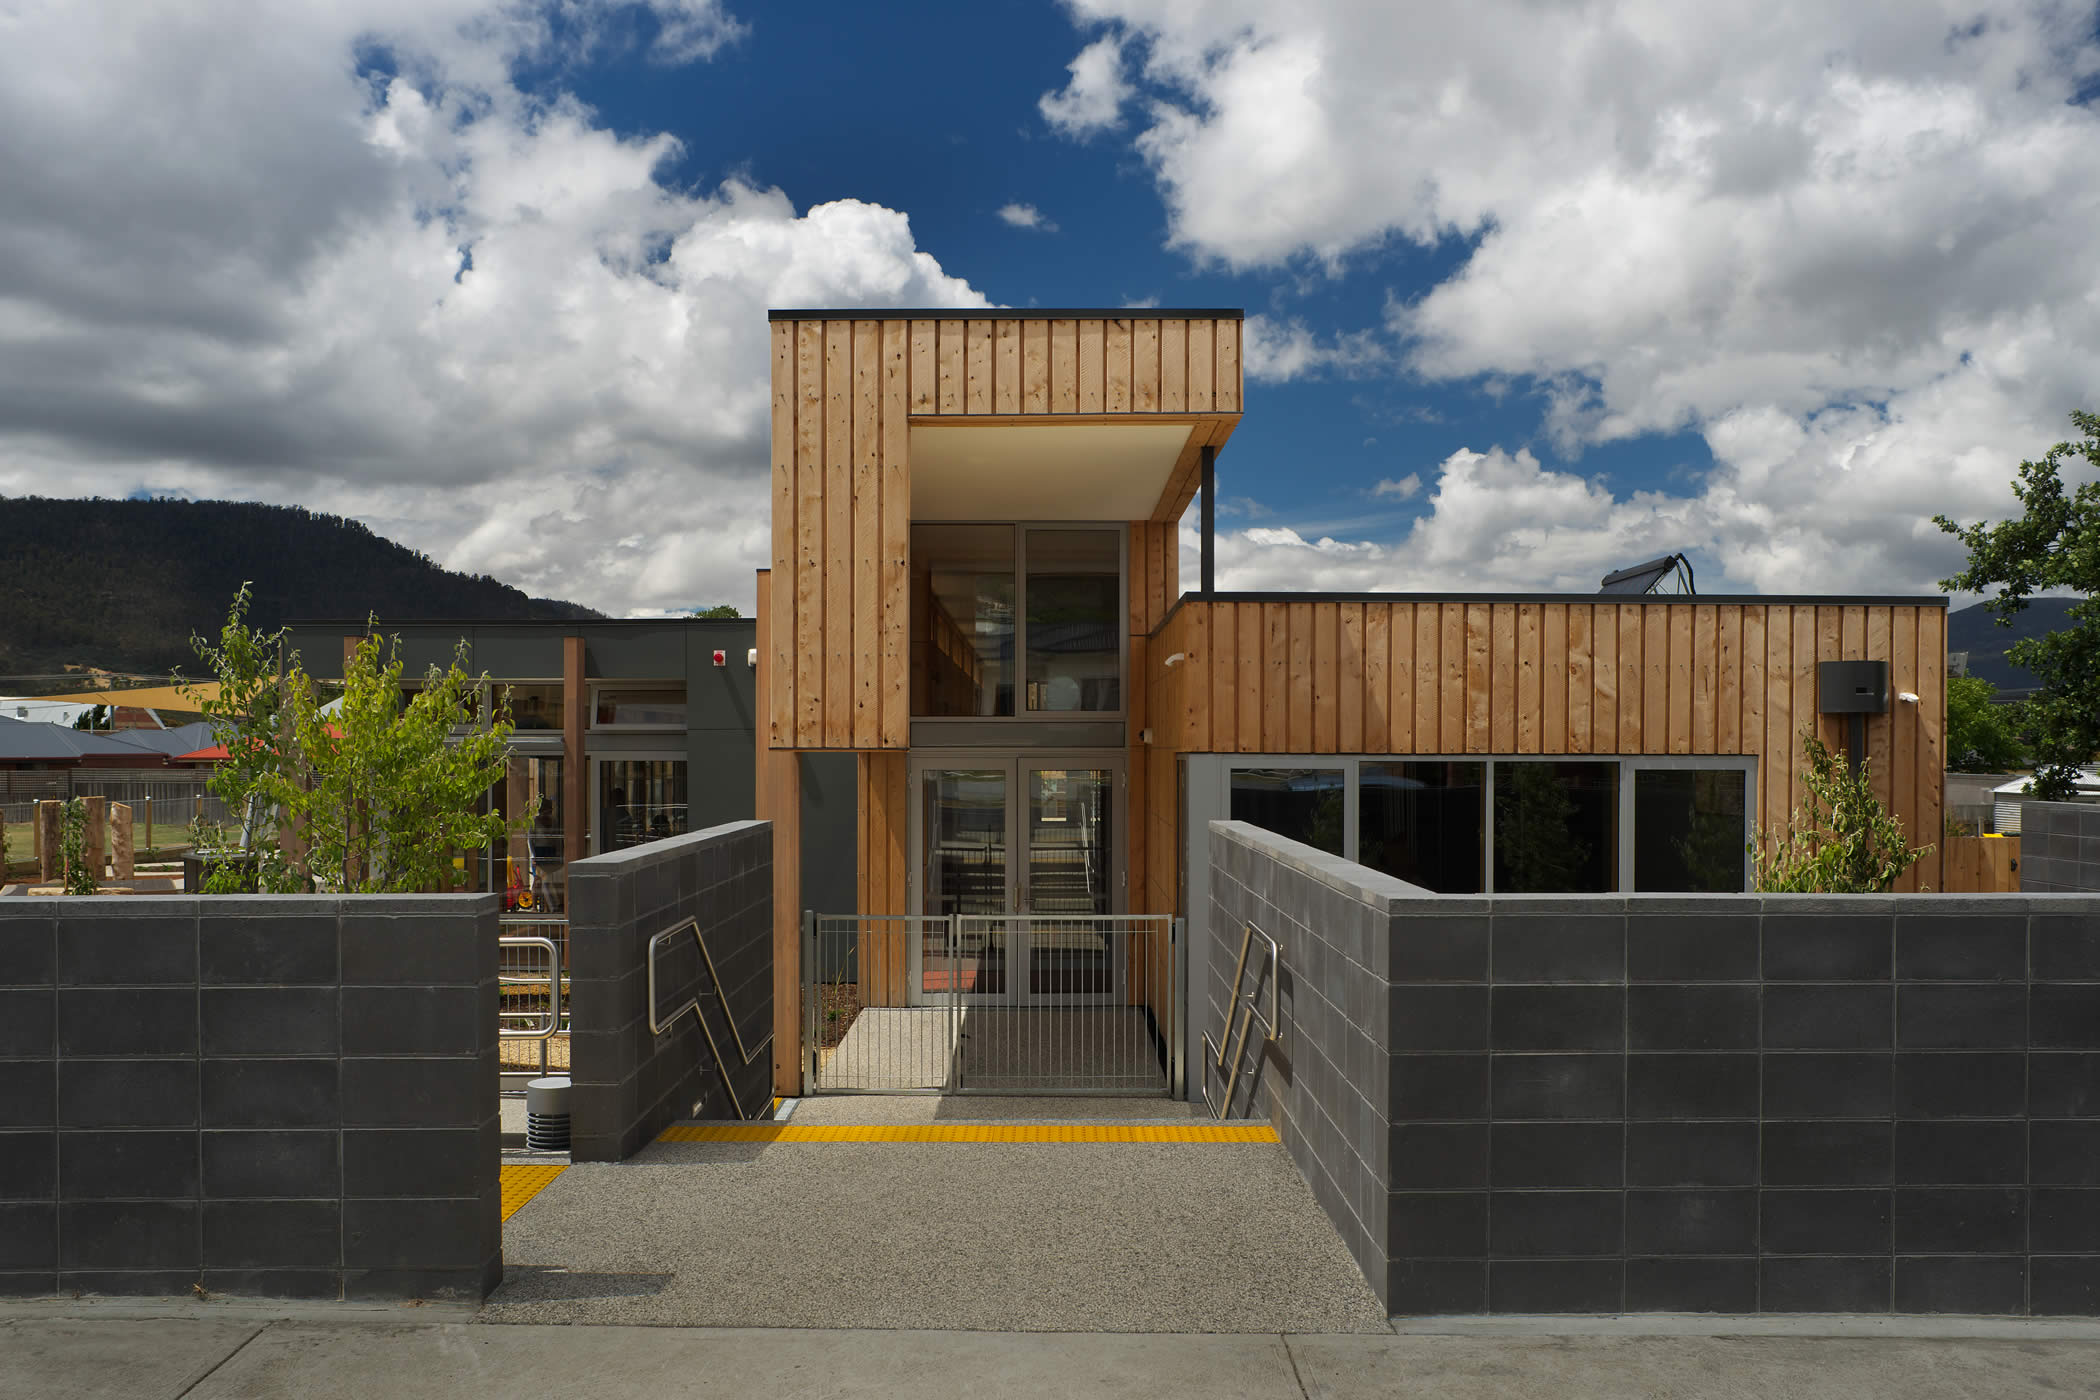 Ptunarra Child and Family Centre, New Norfolk, Tasmania:  The street entrance expresses the interior mezzanine play spine and circulation axis running the building length and introduces the use of external vertical timber cladding. Photo by Ray Joyce.